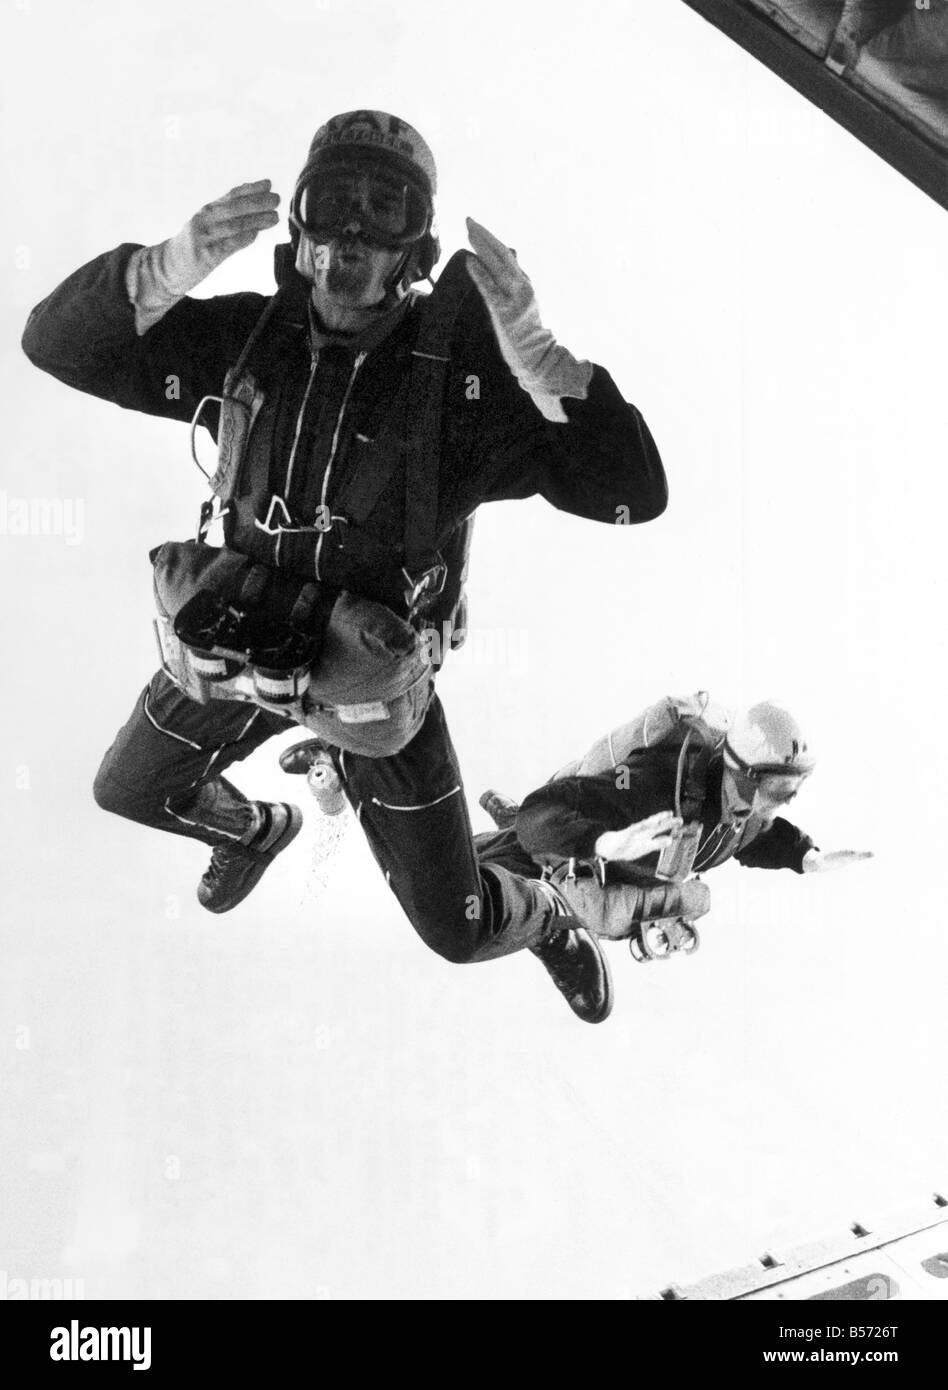 The Falcons swoop back into action, blowing a cheerful mid-air kiss. The Royal Air Force's famous skydivers were making their first drop since their nightmare air crash in Italy eleven days ago. Two members of the team were killed when their Andover transport plane crashed near Sienna. ;April 1972 ;P004312 Stock Photo